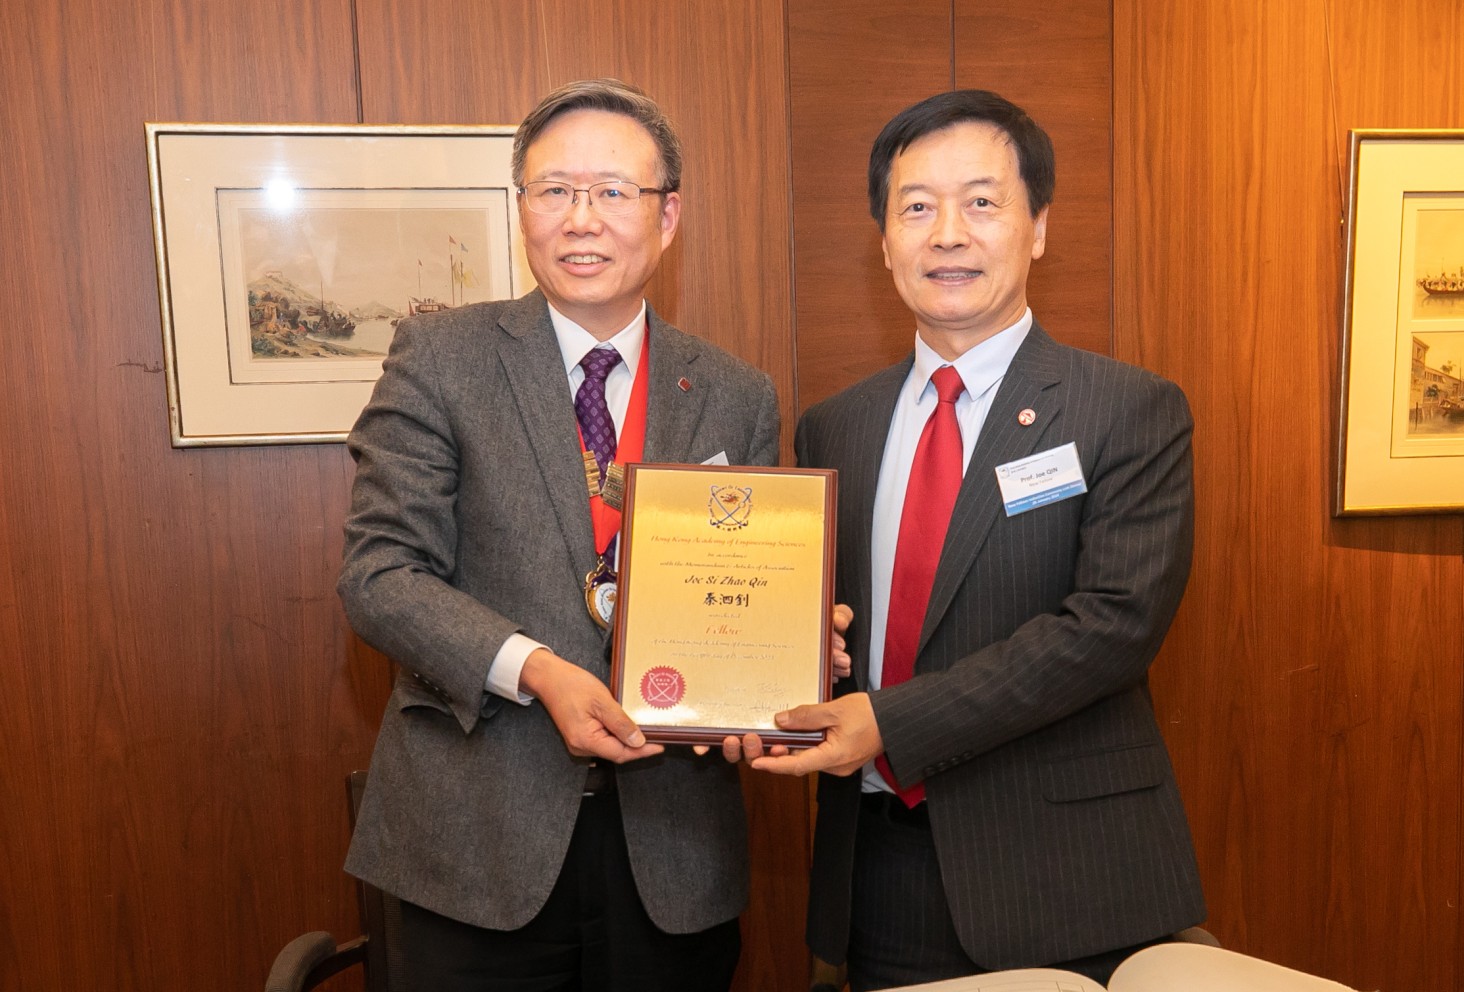 Prof S. Joe Qin, President of Lingnan University (right) has been elected a Fellow of the Hong Kong Academy of Engineering Sciences (HKAES) for the year 2023. The Induction Ceremony of the new Fellows of the HKAES is held to recognise and commend his significant contributions to the field of data science.